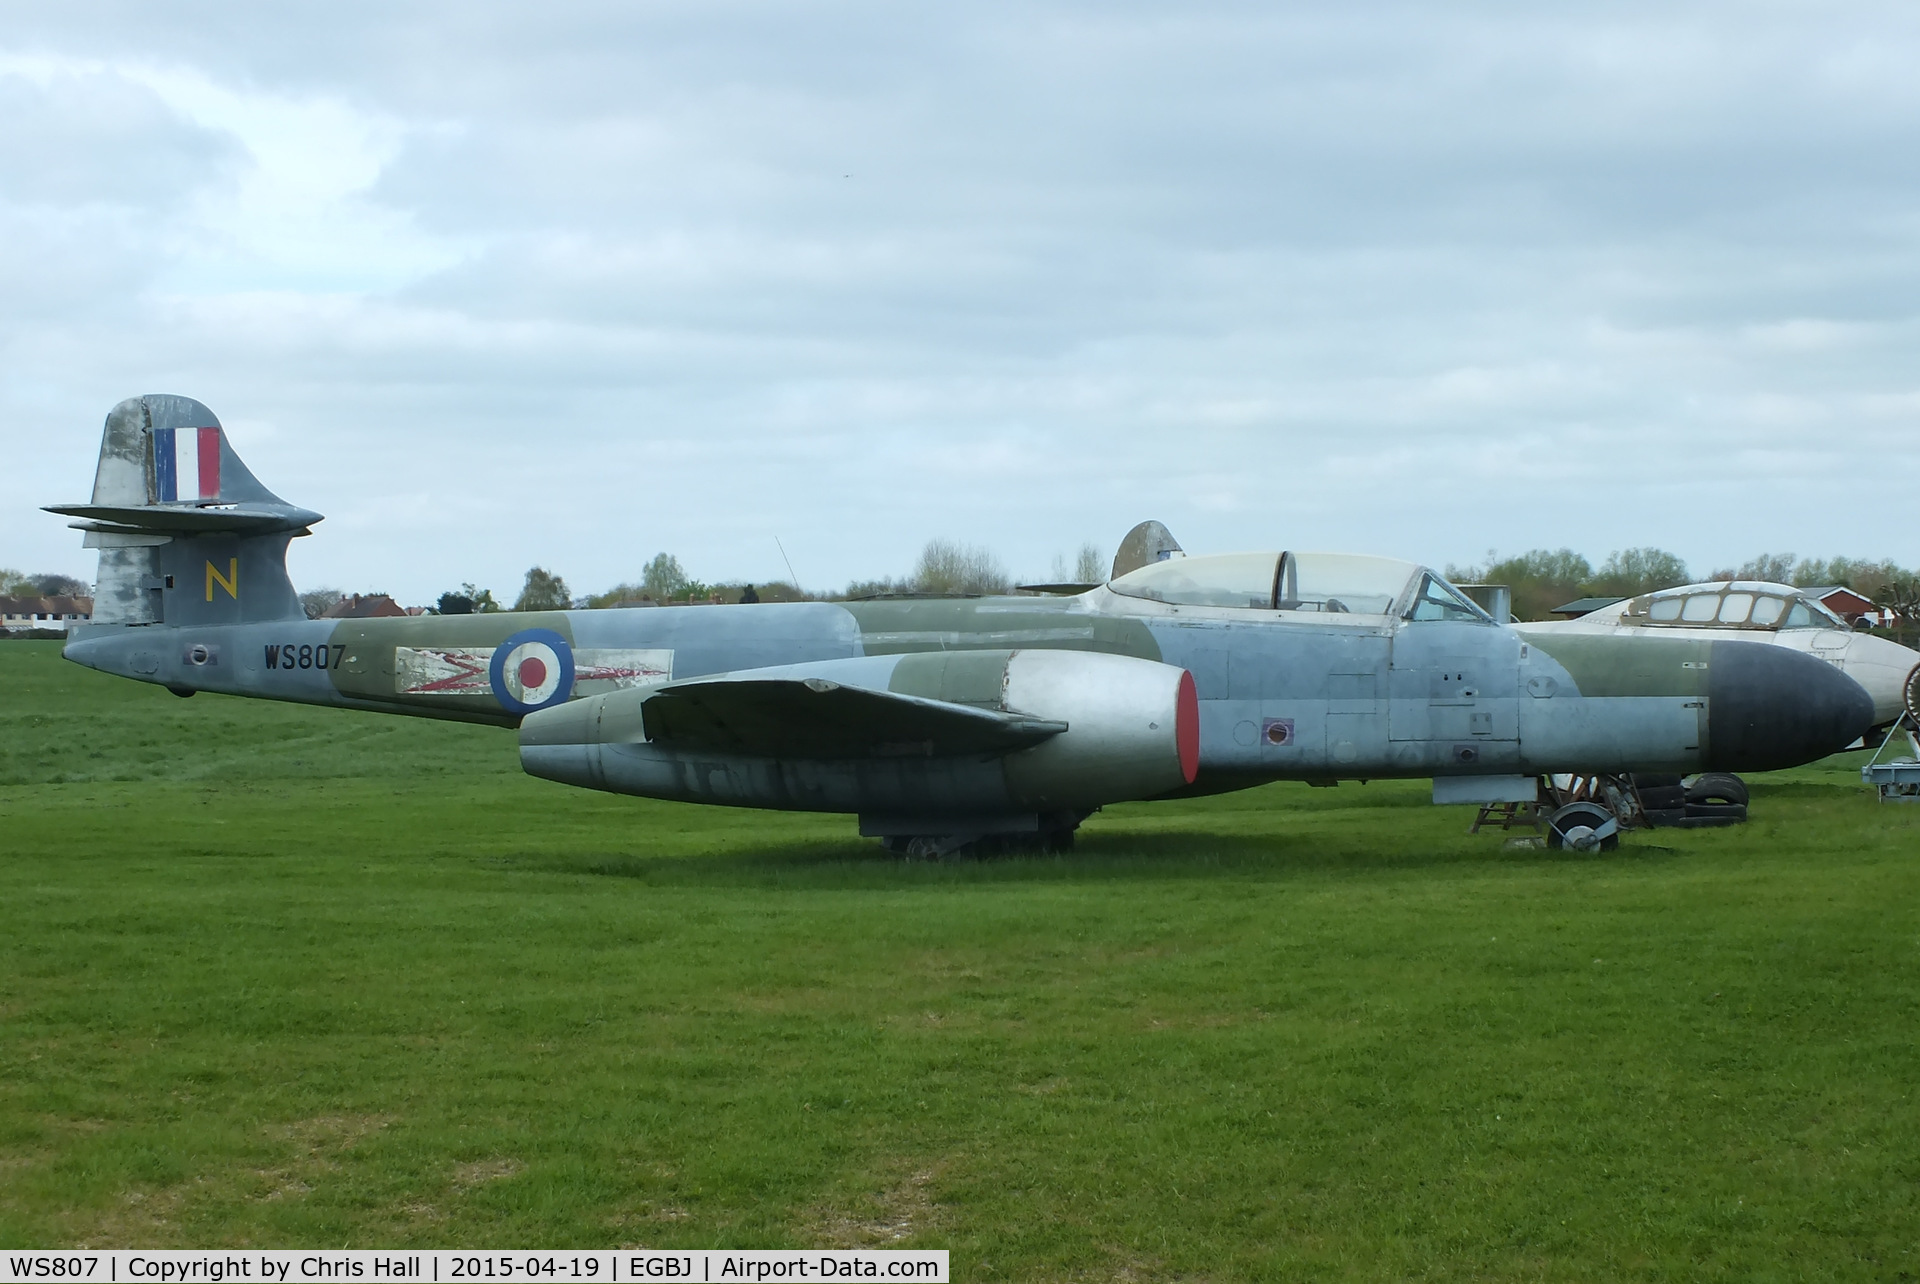 WS807, 1954 Gloster Meteor NF(T).14 C/N Not found WS807, at the Jet Age Museum